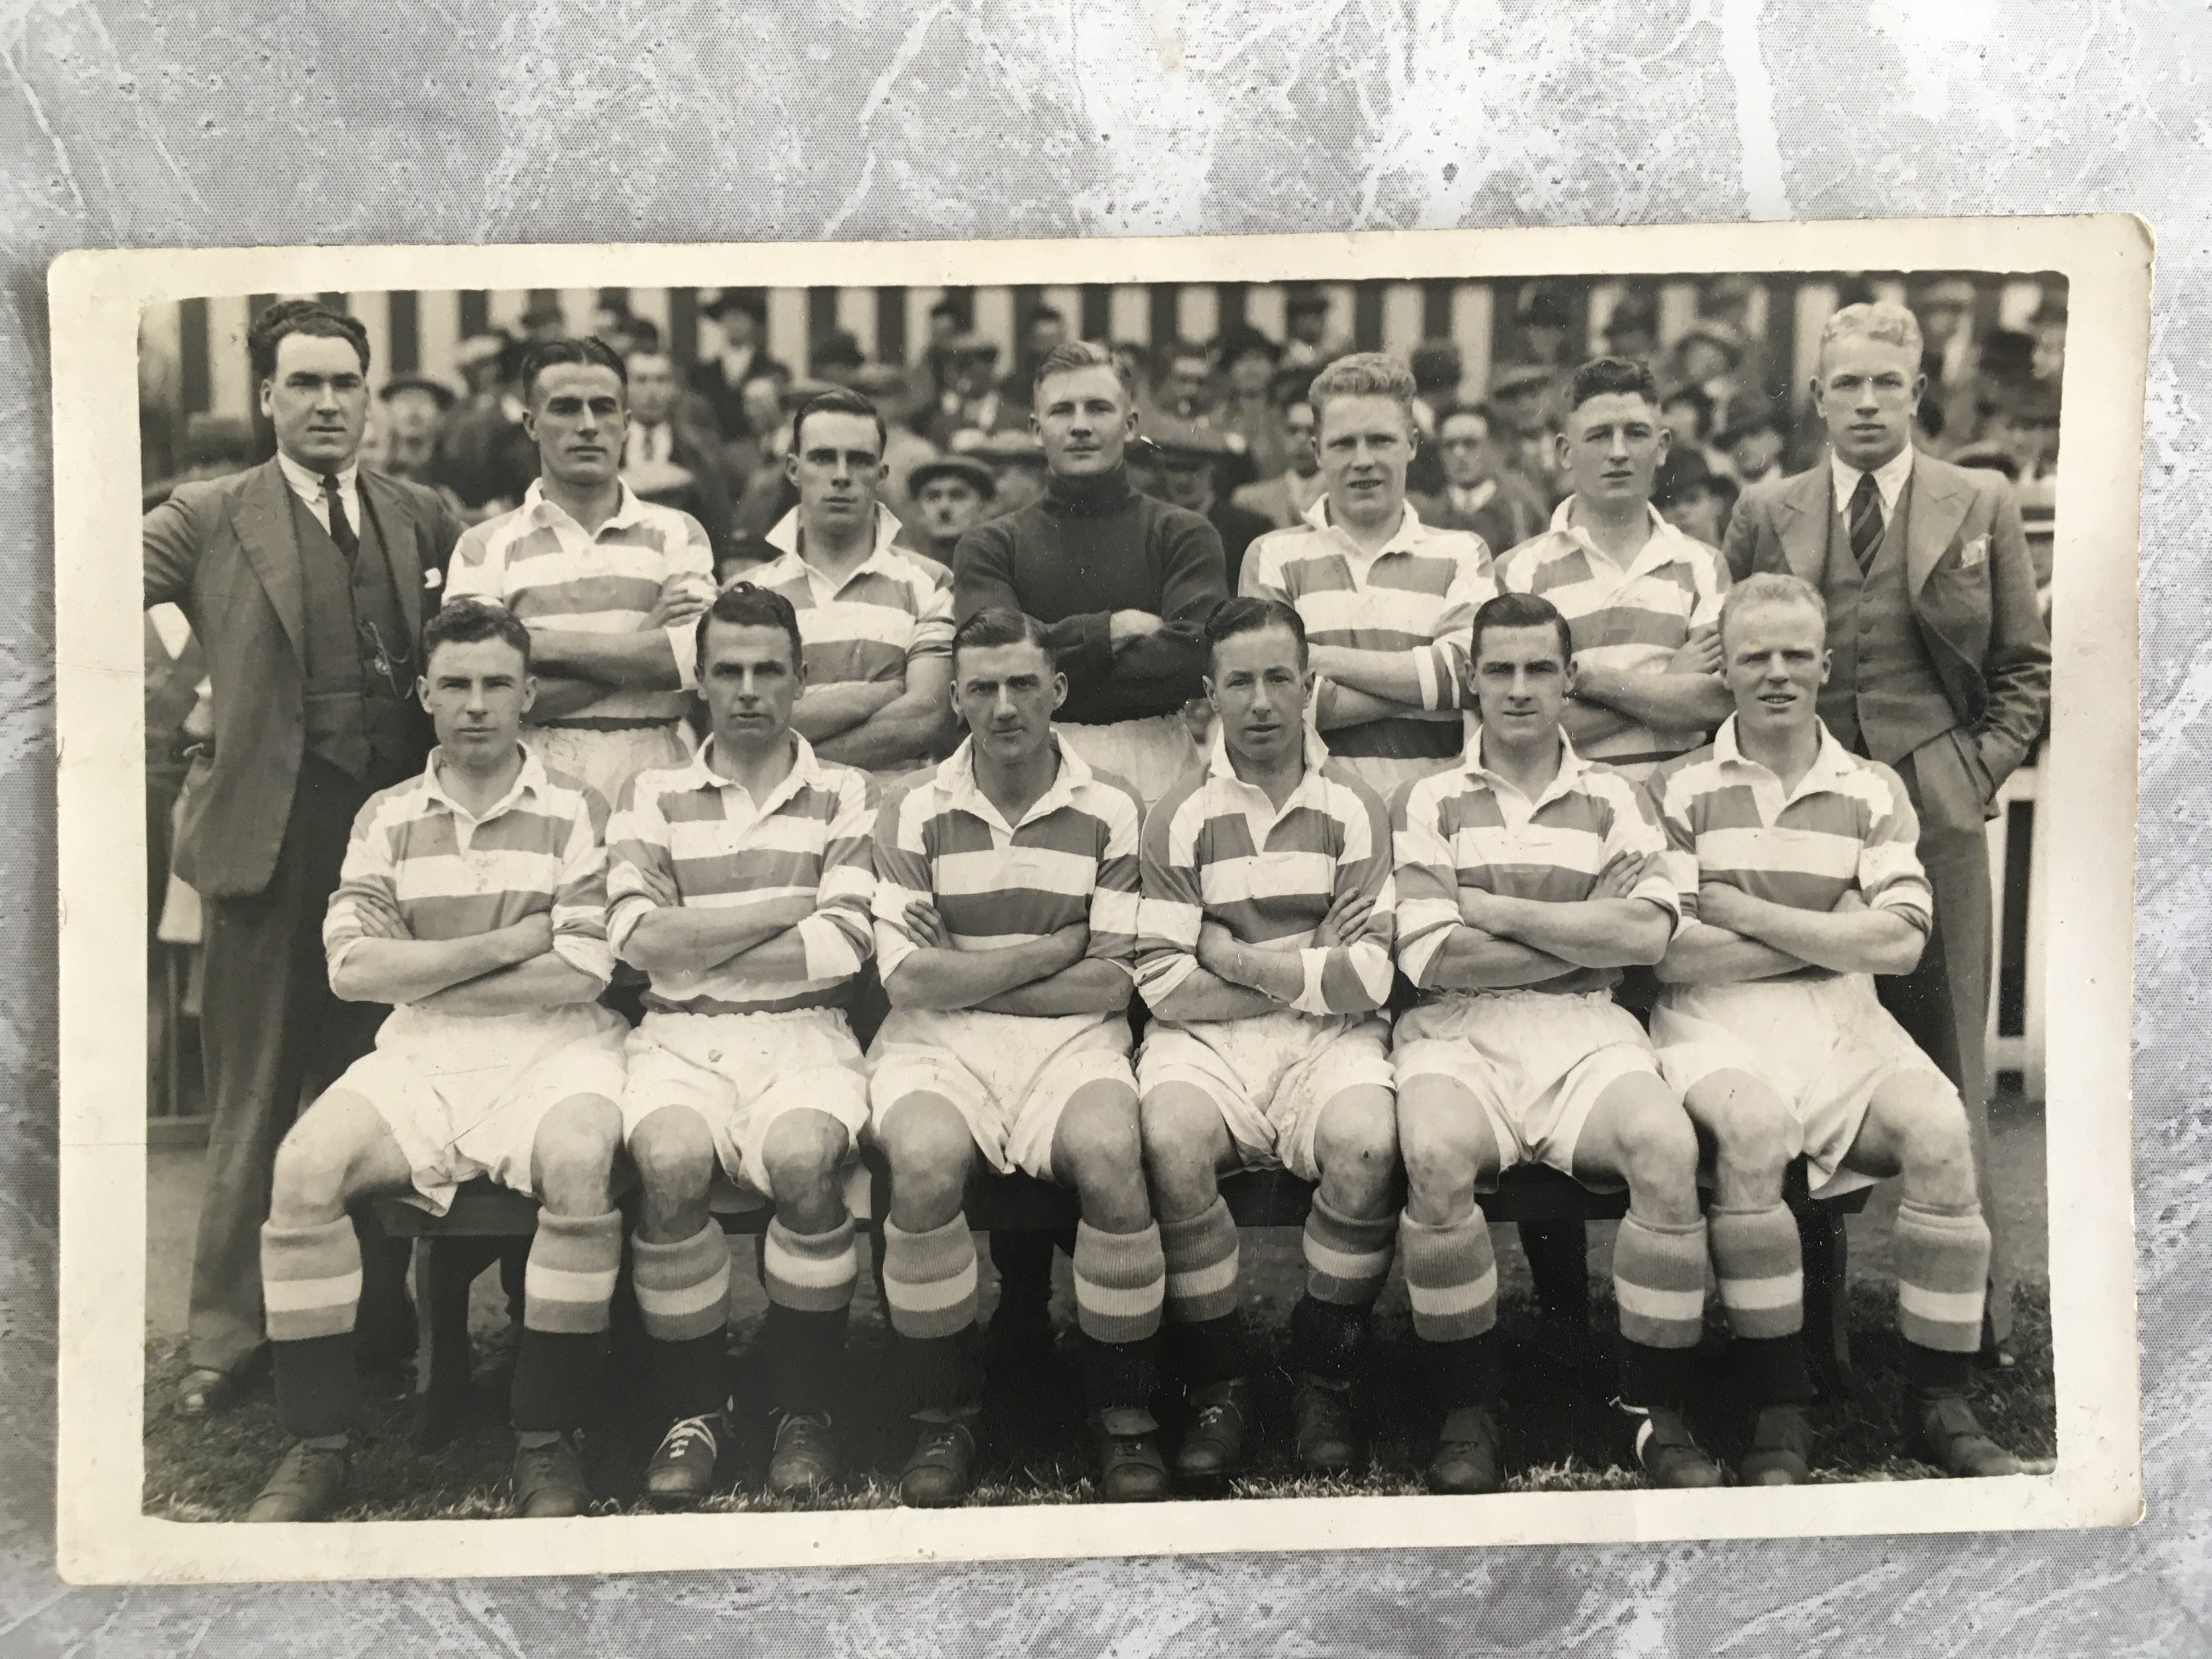 1940s QPR Football Postcard: Very good condition with Wilkes press stamp stamp to rear. Tiny mark to